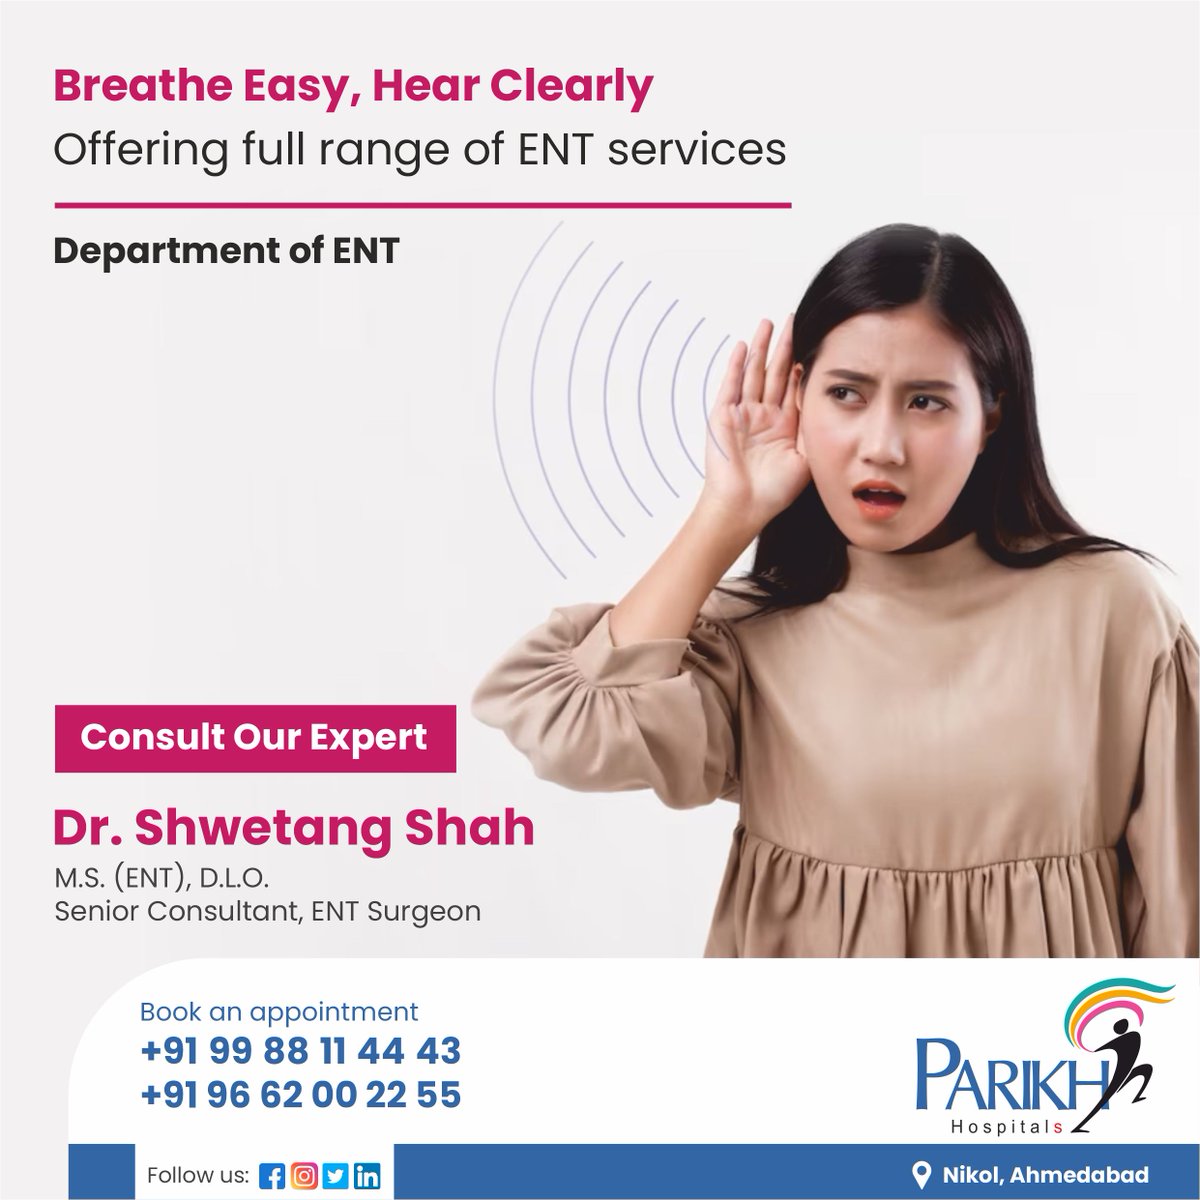 Are you suffering from Ear problems ? Trust Parikh Hospital, Nikol, Ahmedabad for expert care. These problems can come up due to a number of reasons, including infections, genetics, allergies or trauma. #ParikhHospitals #nikol #Ent #ear #nose #throat #bestdoctor #besthospital